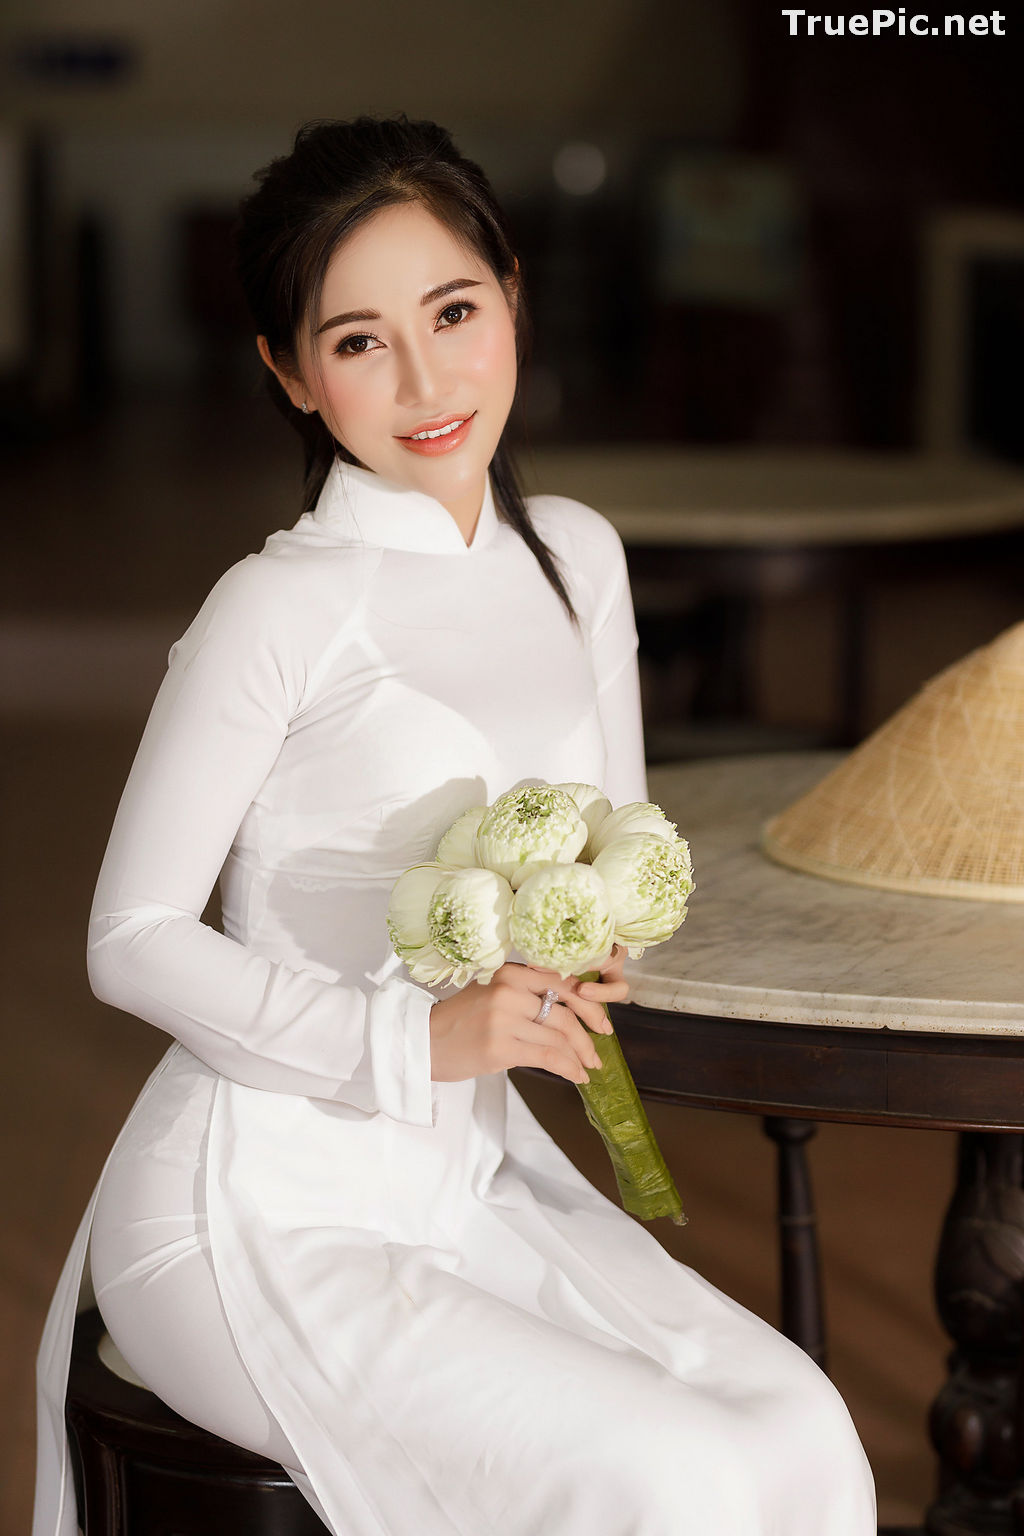 Image The Beauty of Vietnamese Girls with Traditional Dress (Ao Dai) #2 - TruePic.net - Picture-83